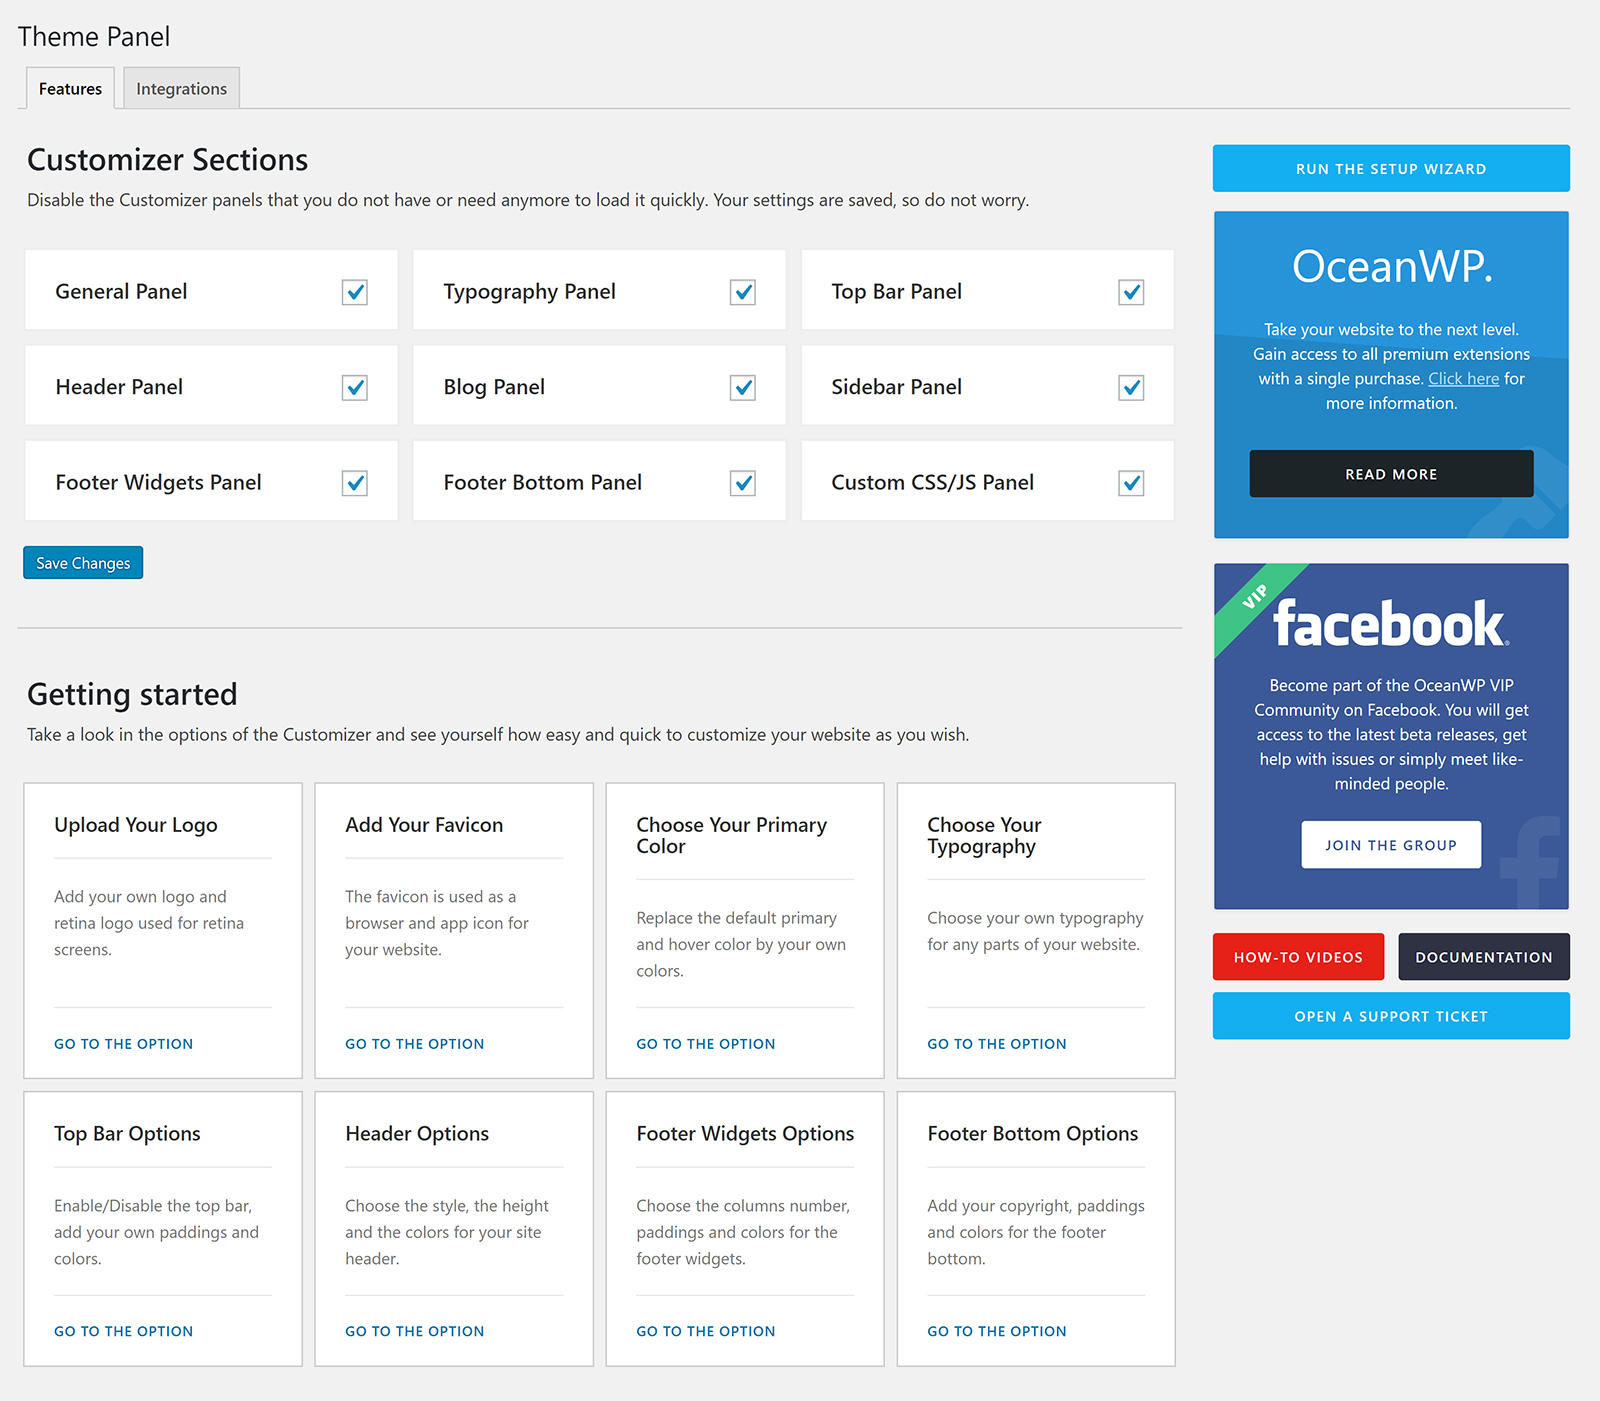 OceanWP Theme Panel Features